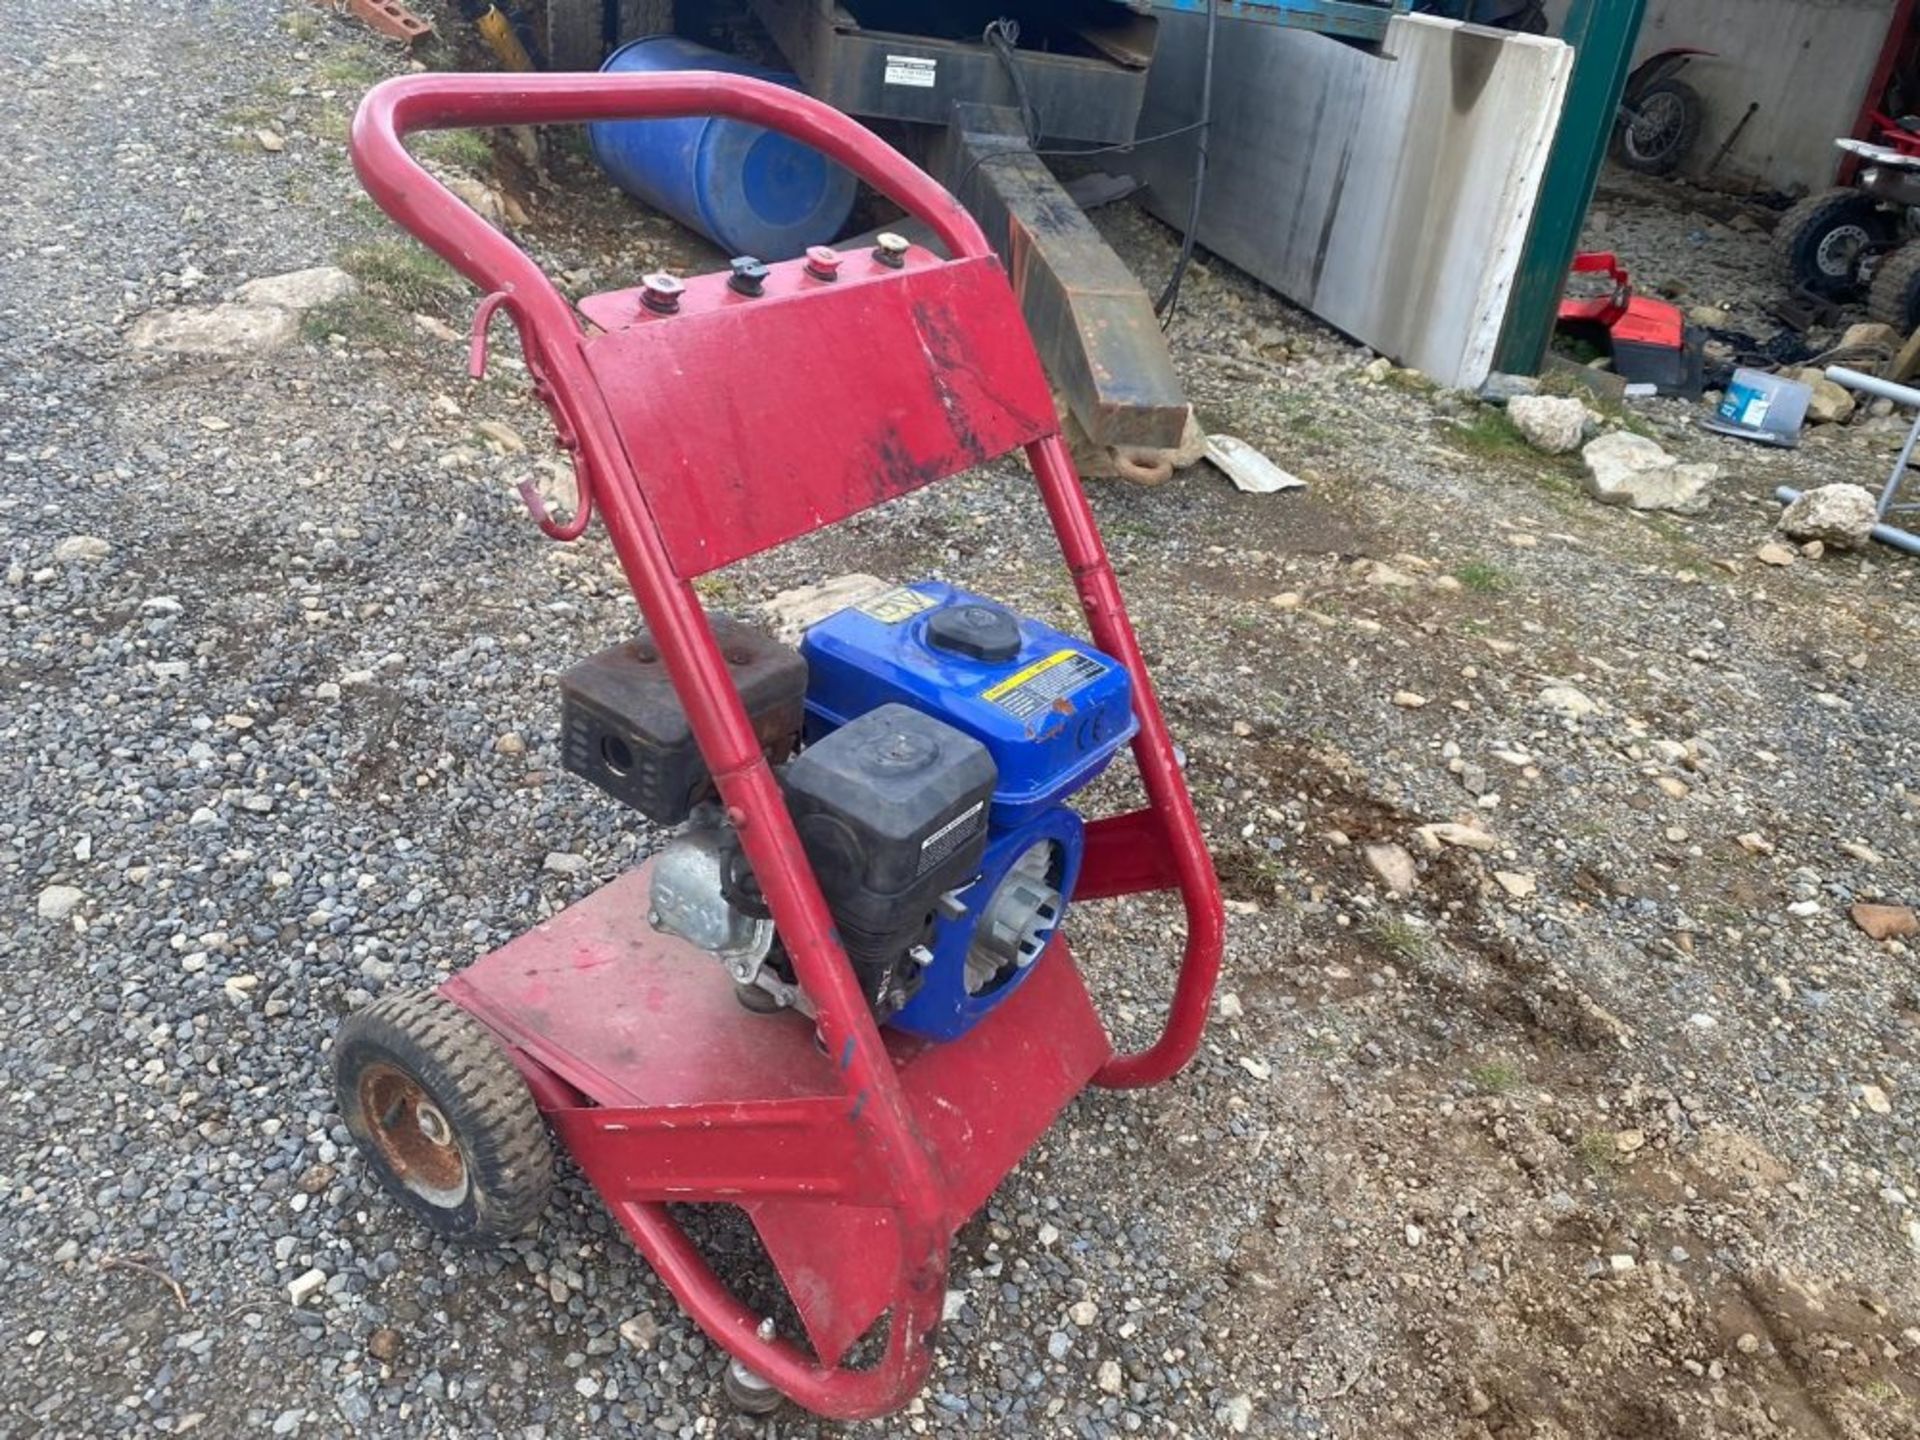 Portable pressure washer - Image 2 of 2